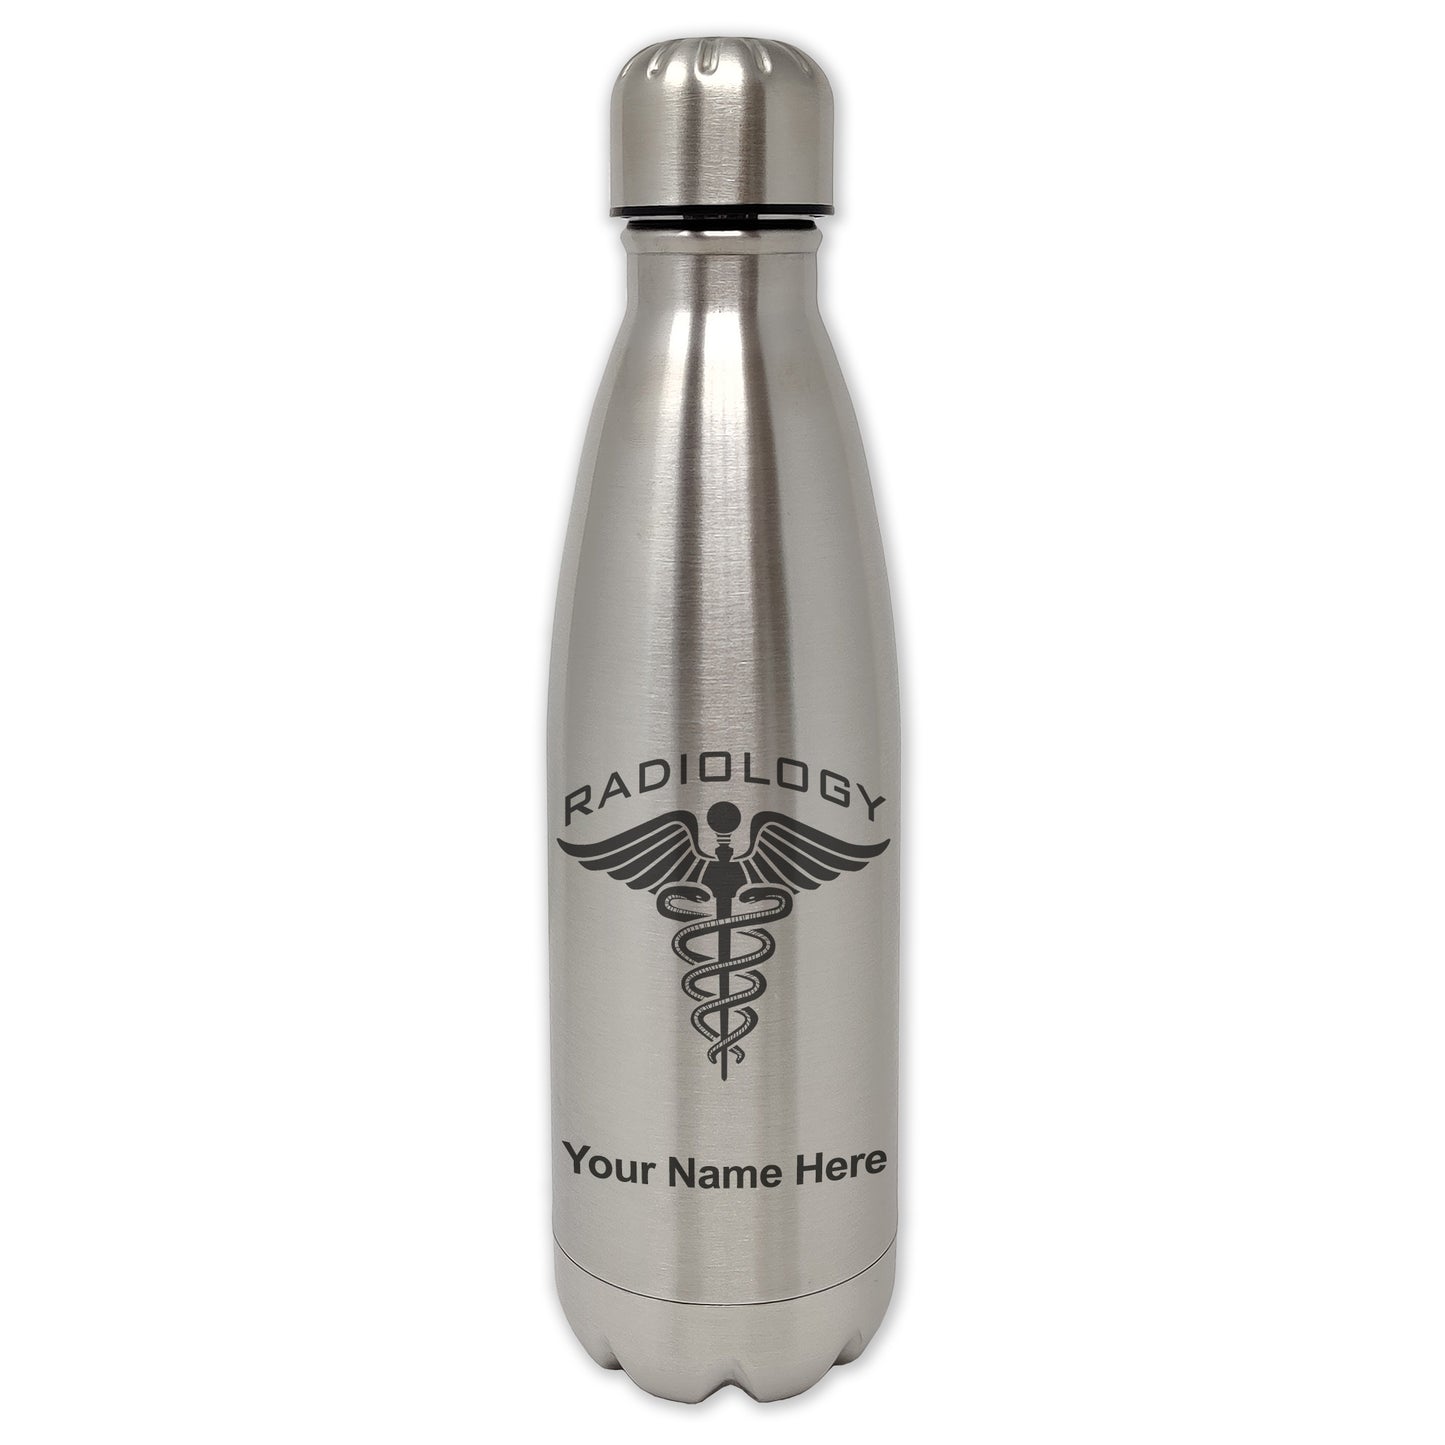 LaserGram Single Wall Water Bottle, Radiology, Personalized Engraving Included